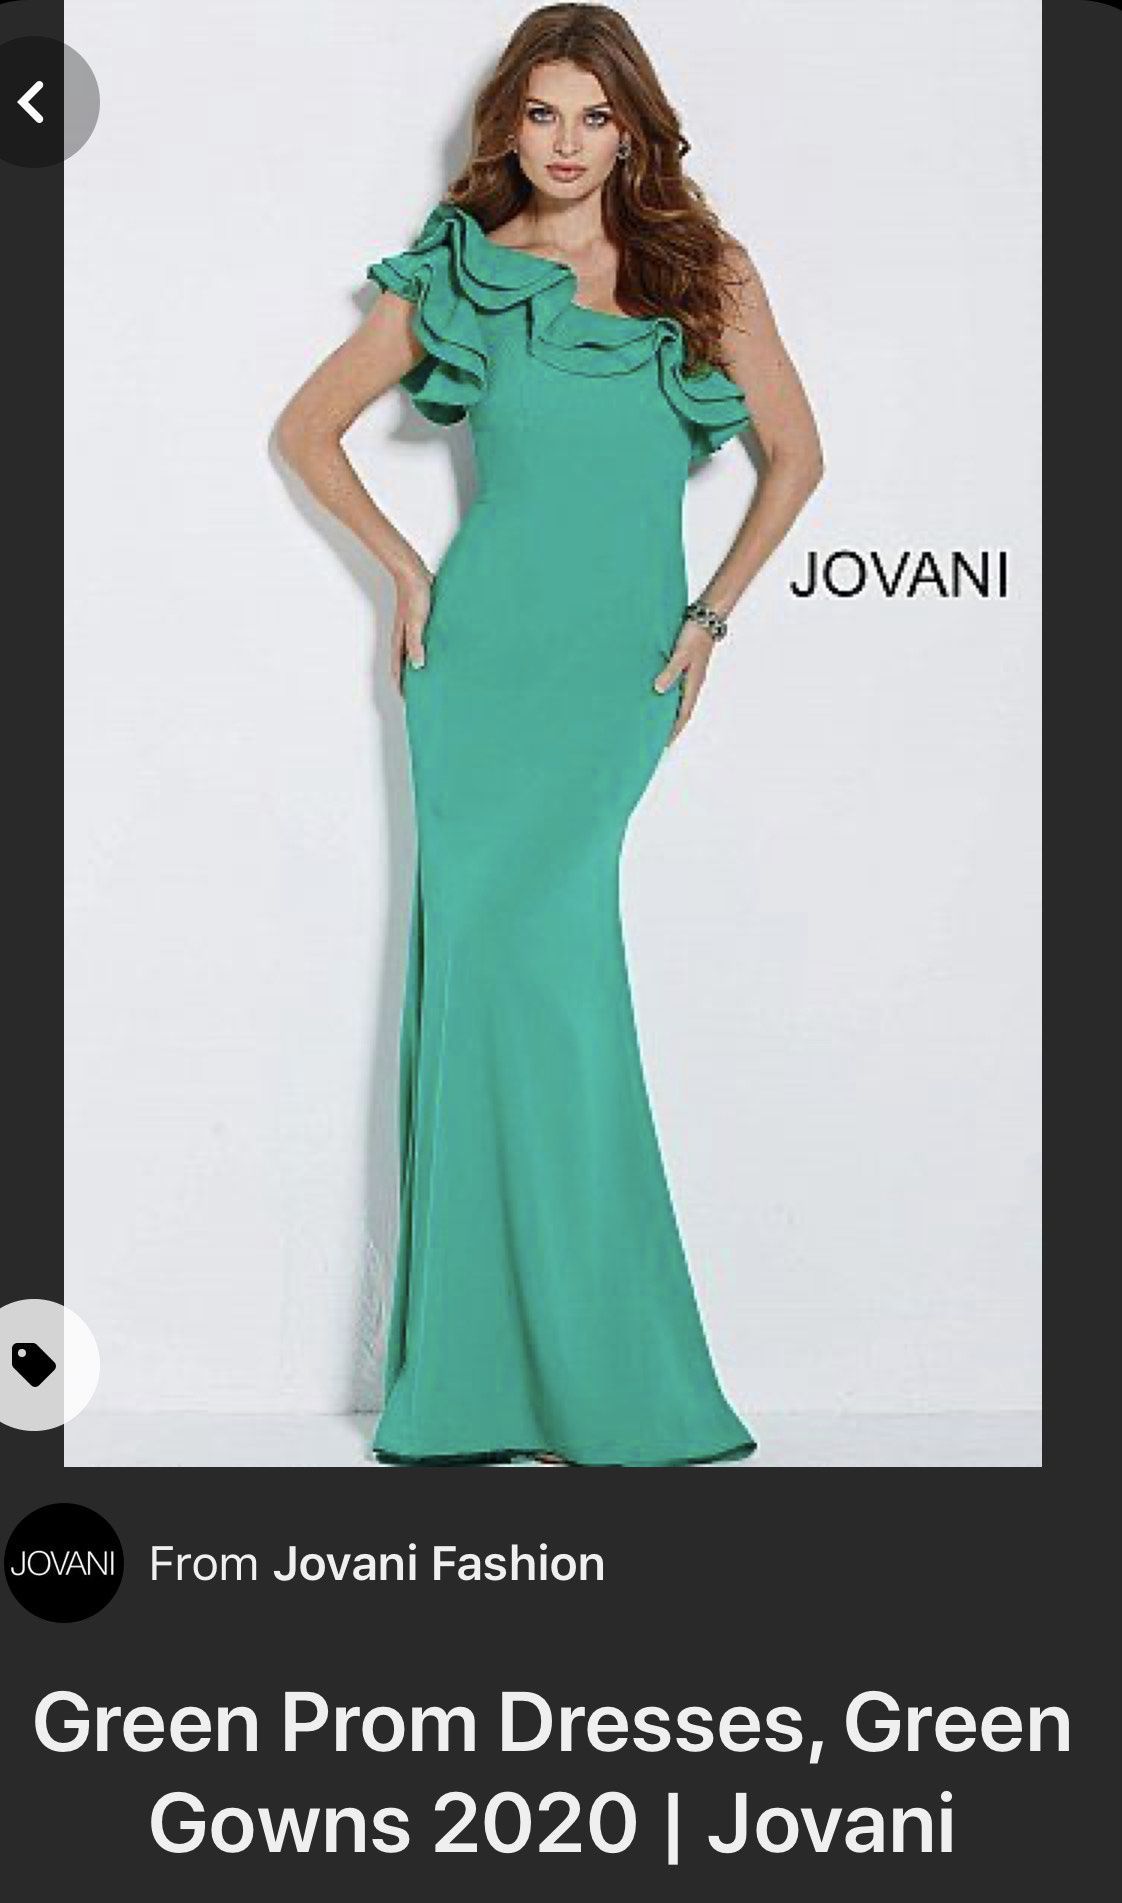 Jovani Green Size 0 Tall Height One Shoulder Prom Mermaid Dress on Queenly